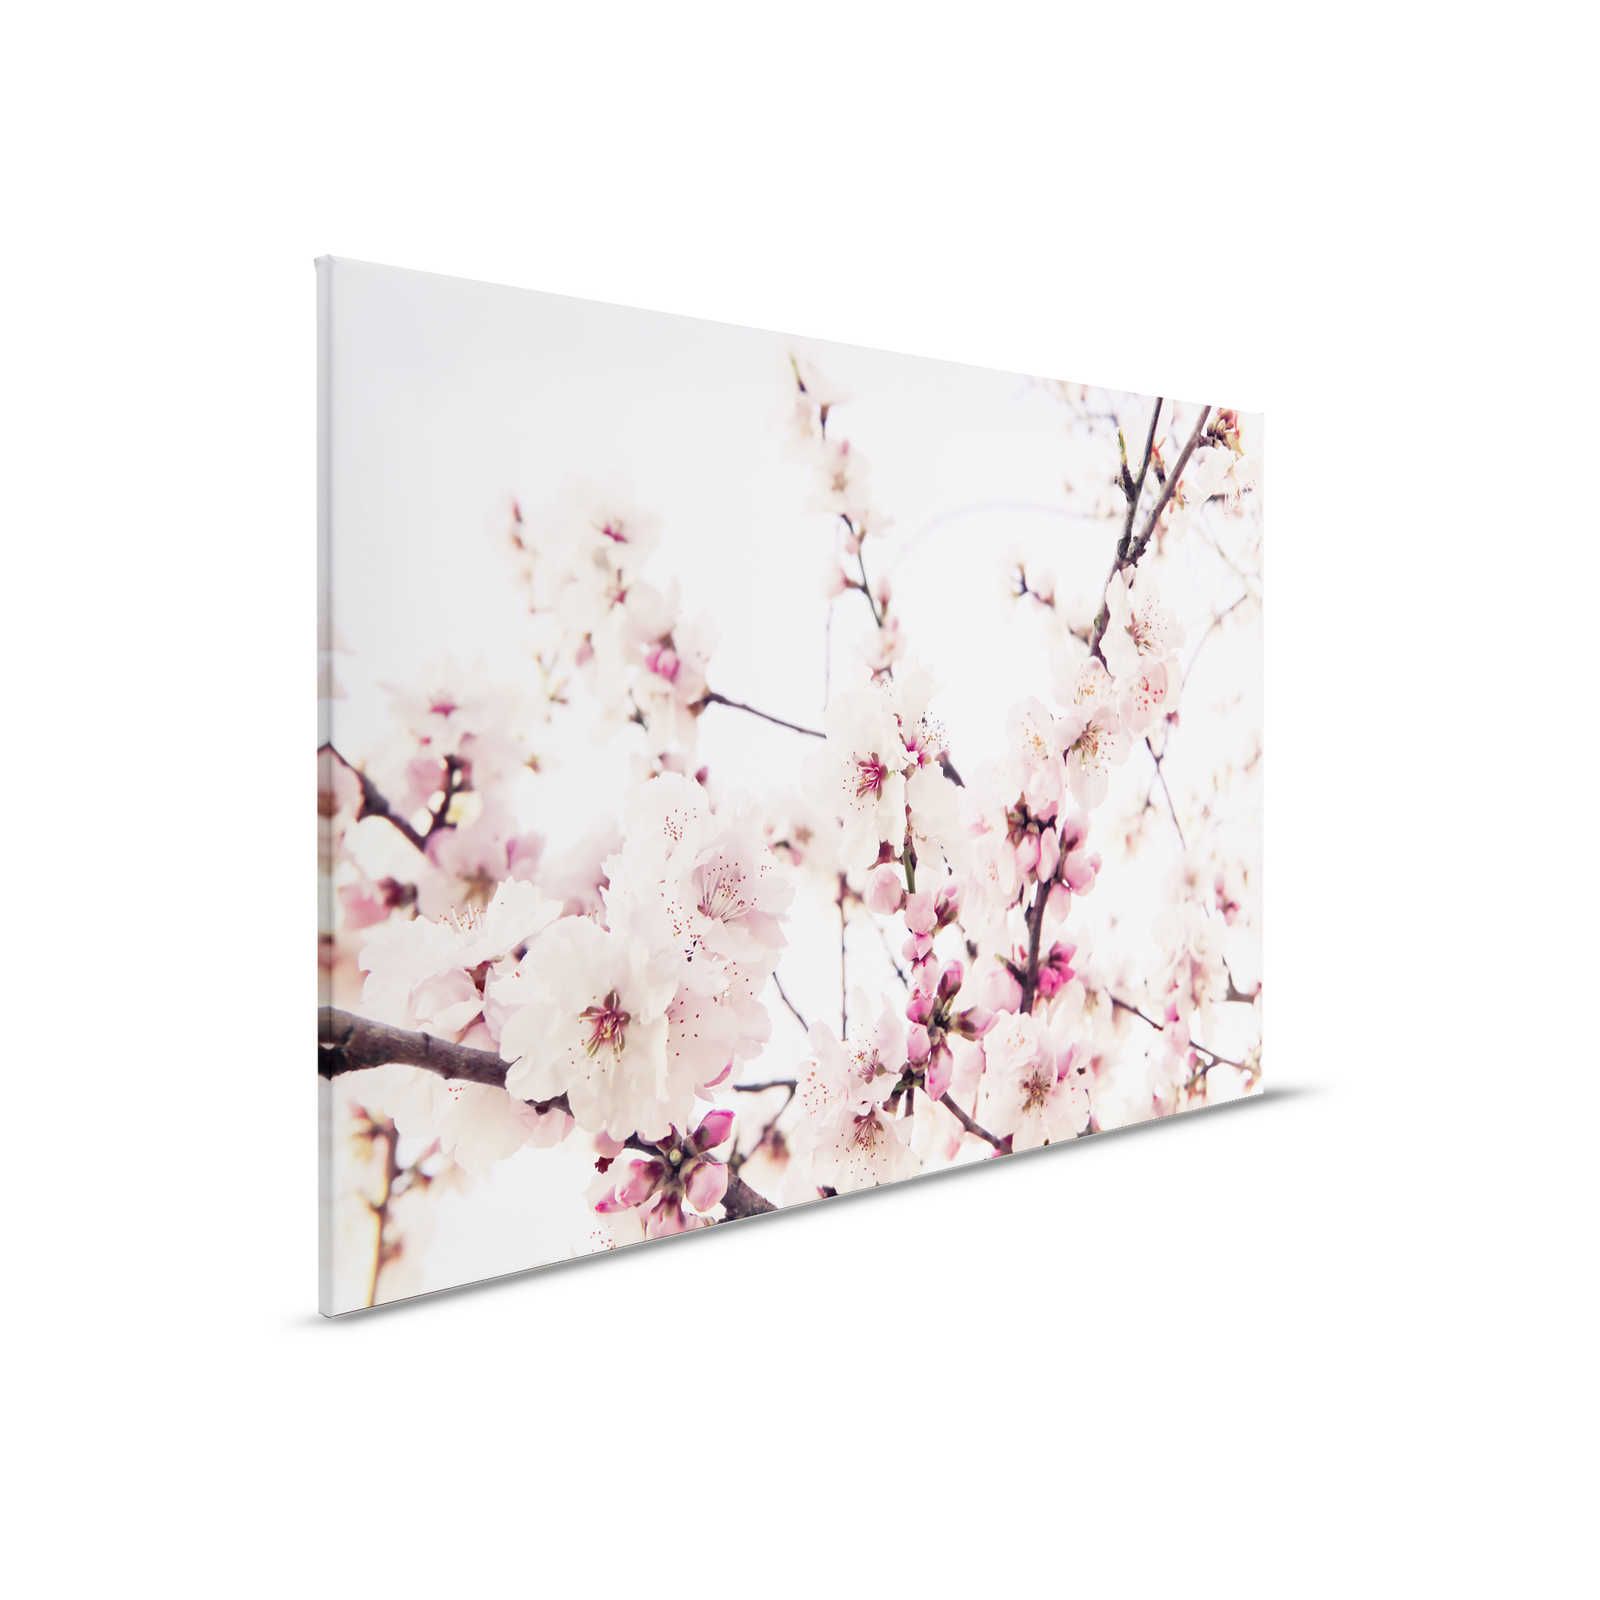 Nature Canvas Painting with Cherry Blossoms - 0.90 m x 0.60 m
